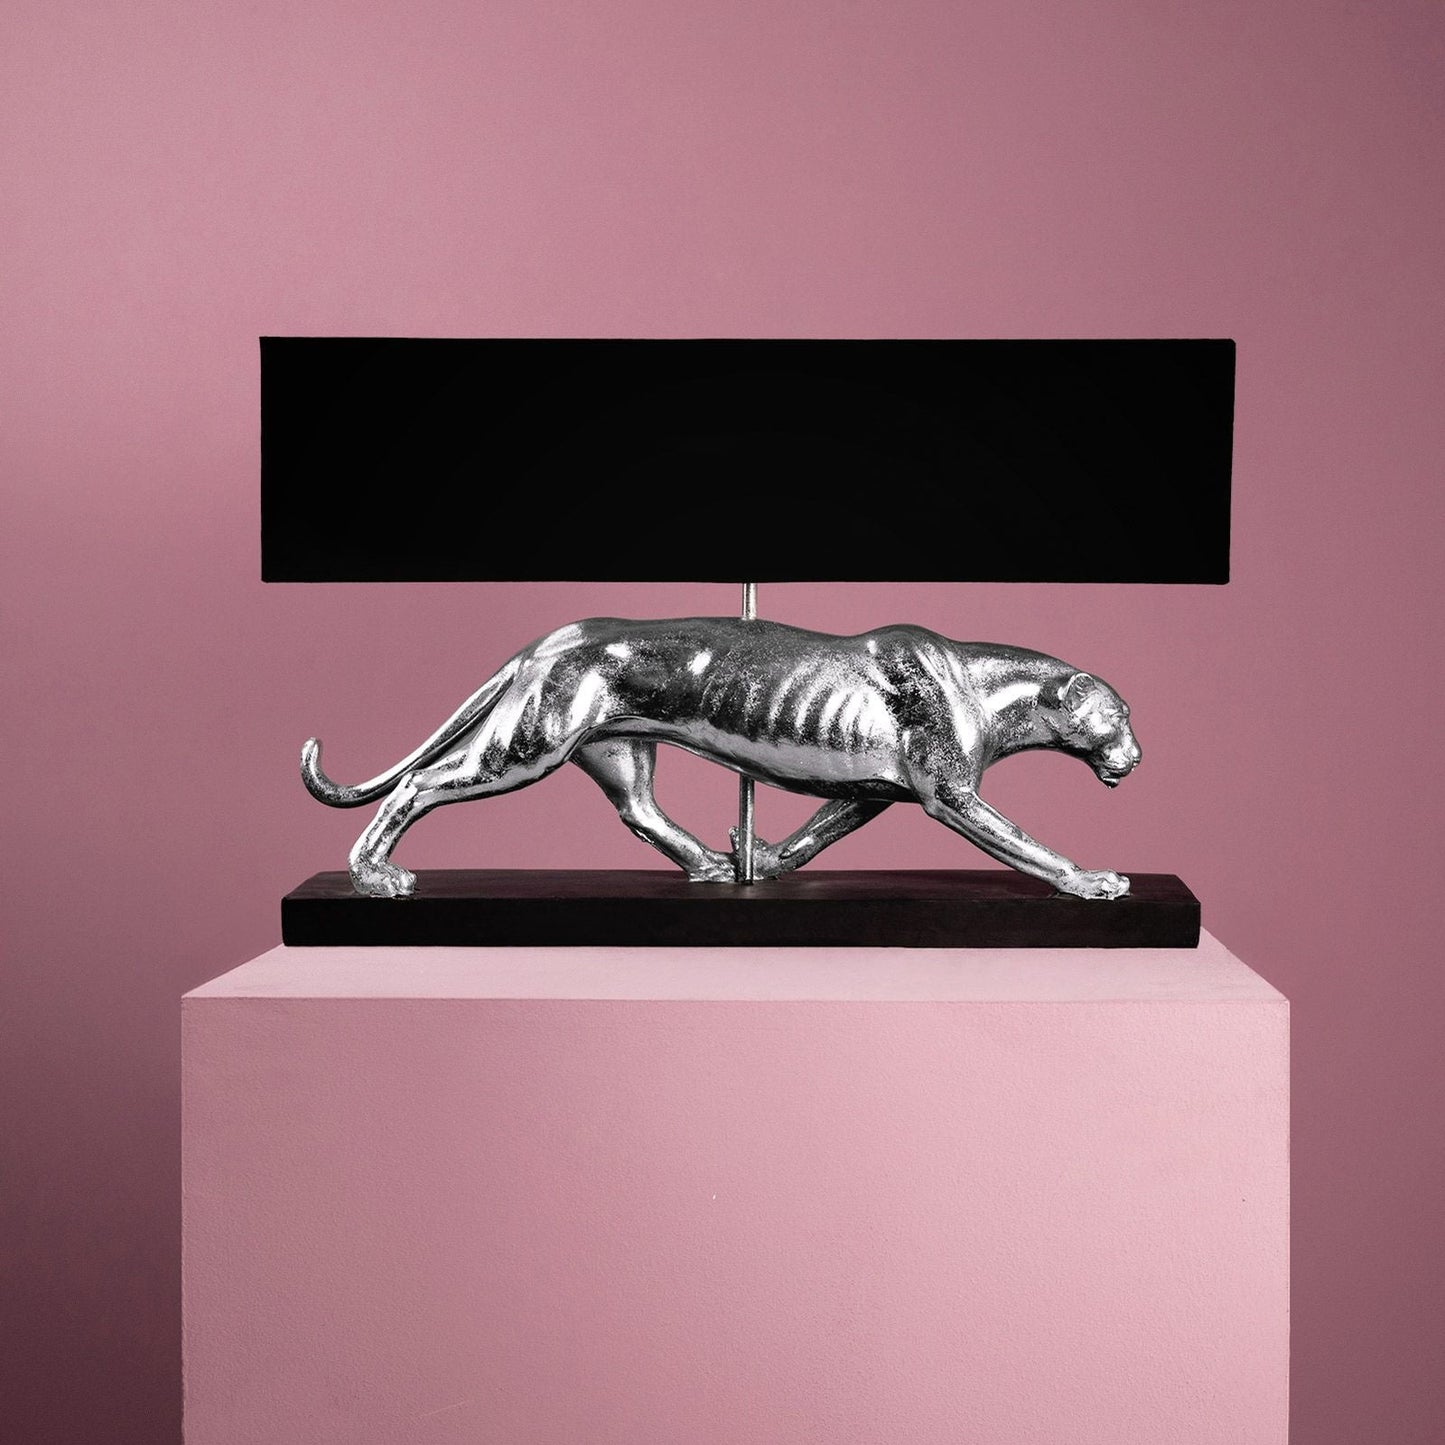 Baghiro Panther Design Table Lamp in Black and Silver - |VESIMI Design| Luxury Bathrooms and Home Decor